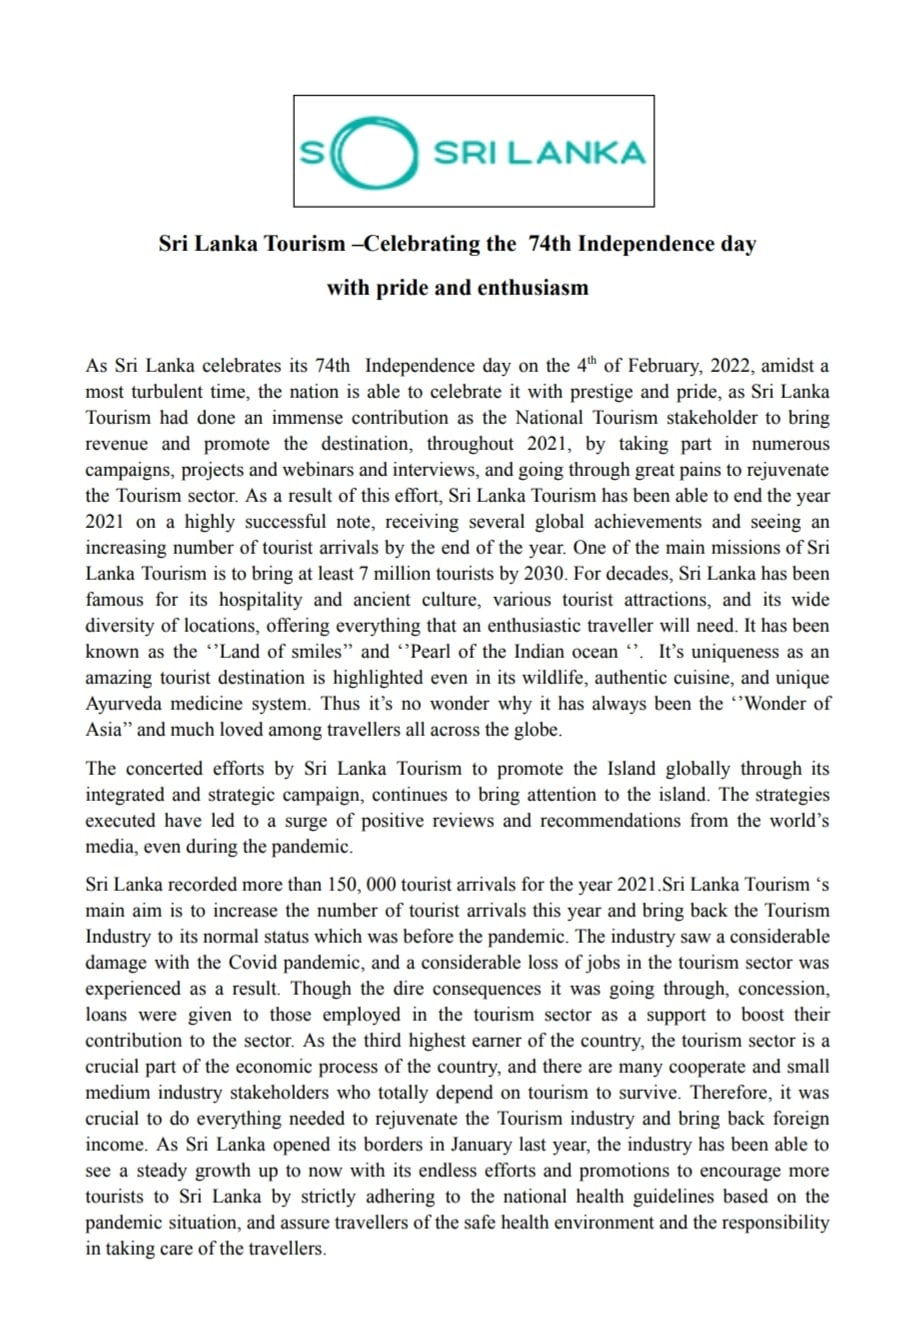 Sri Lanka Tourism-Celebrating the 74th Independence day with pride and enthusiasm